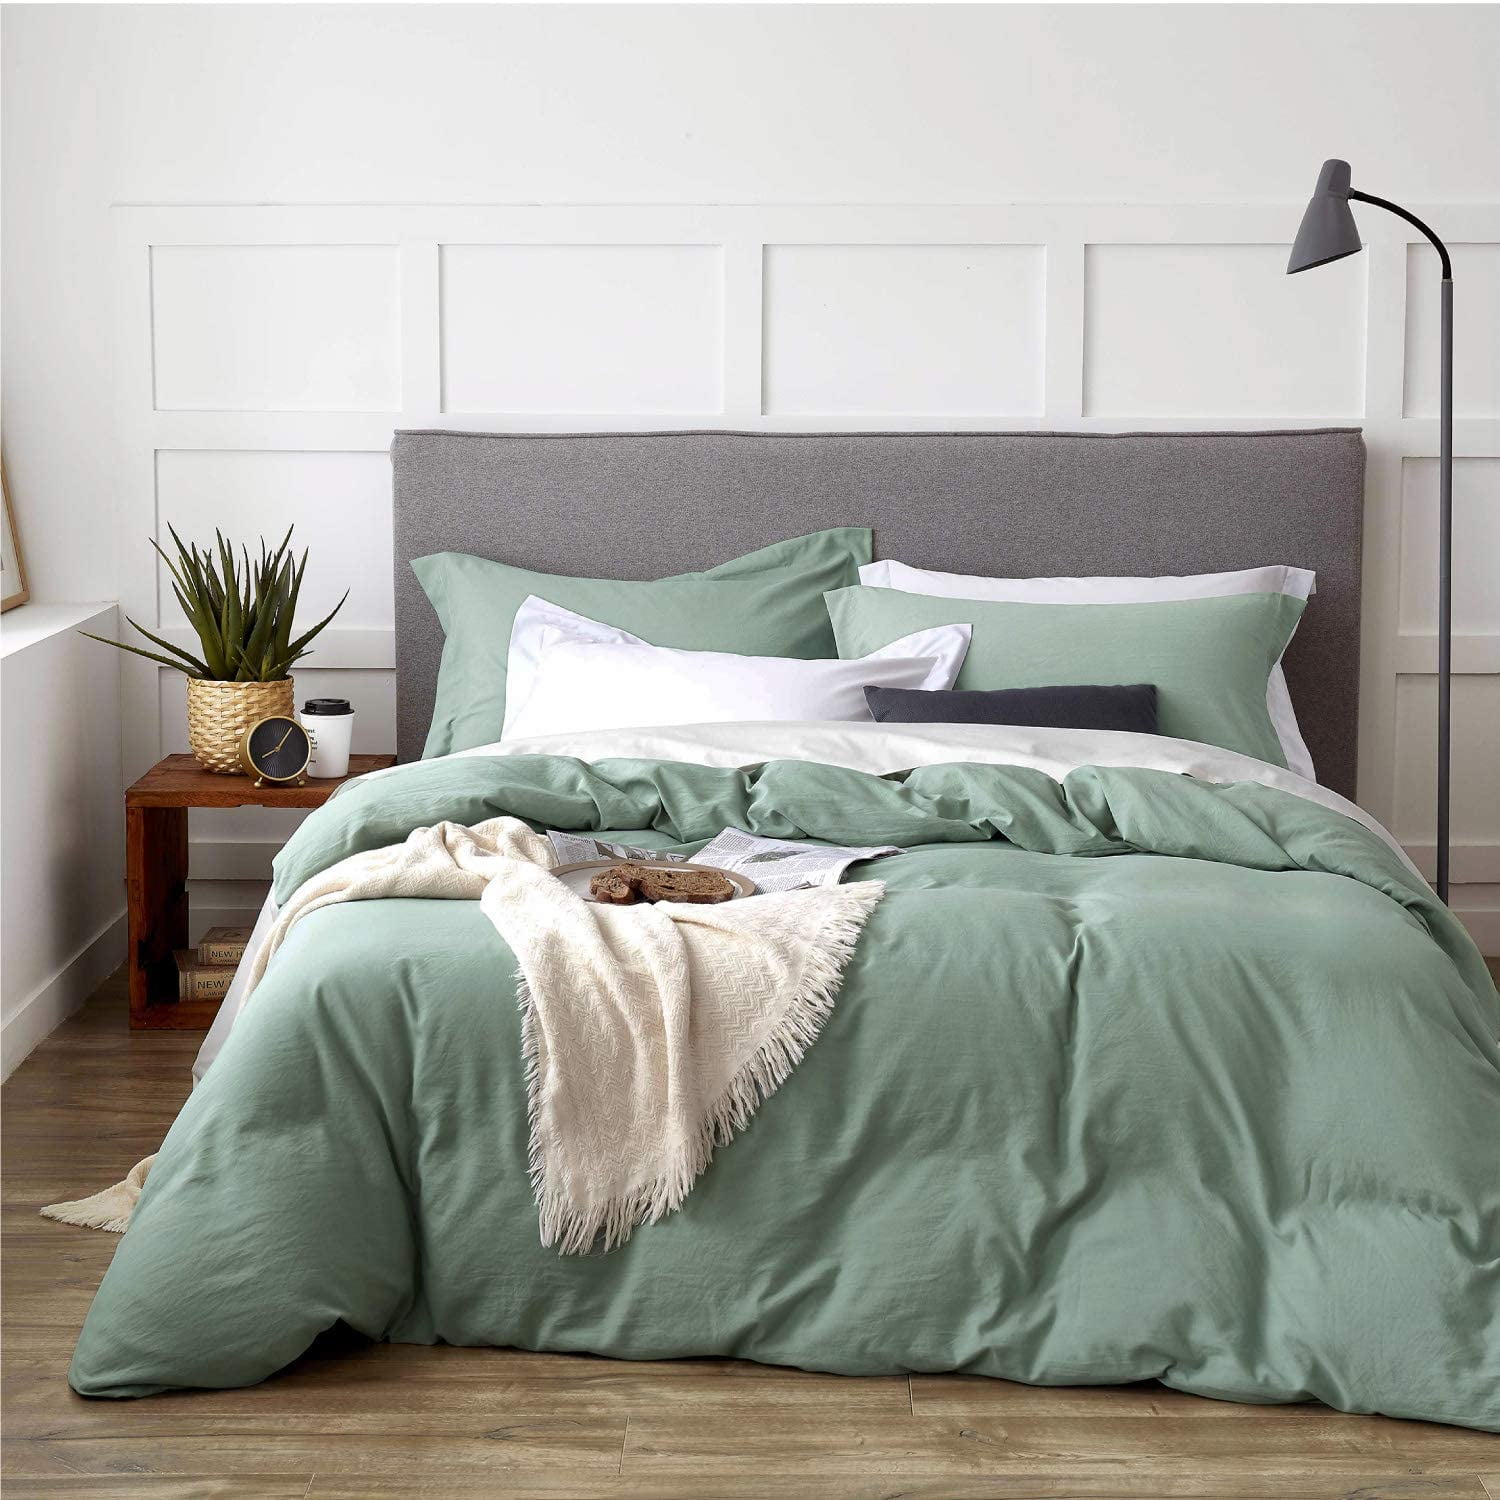 Golden Home Sage Green Washed Duvet Cover Full/Queen Size Set with Zipper Closure, Ultra Soft